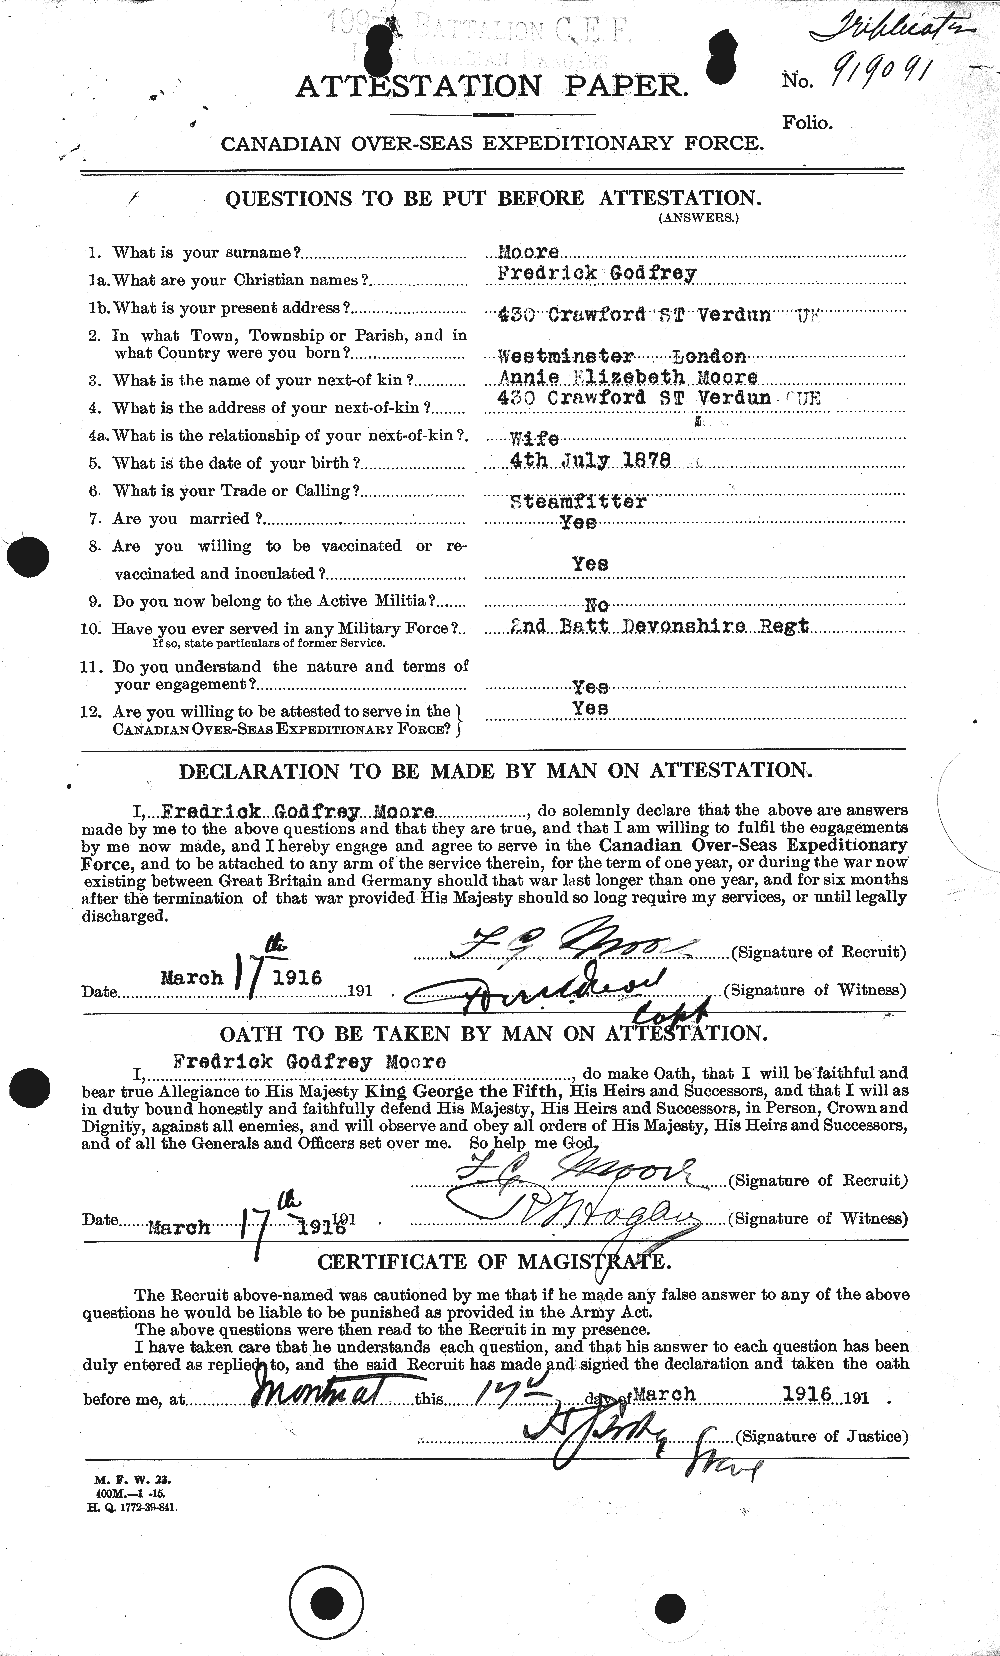 Personnel Records of the First World War - CEF 506762a